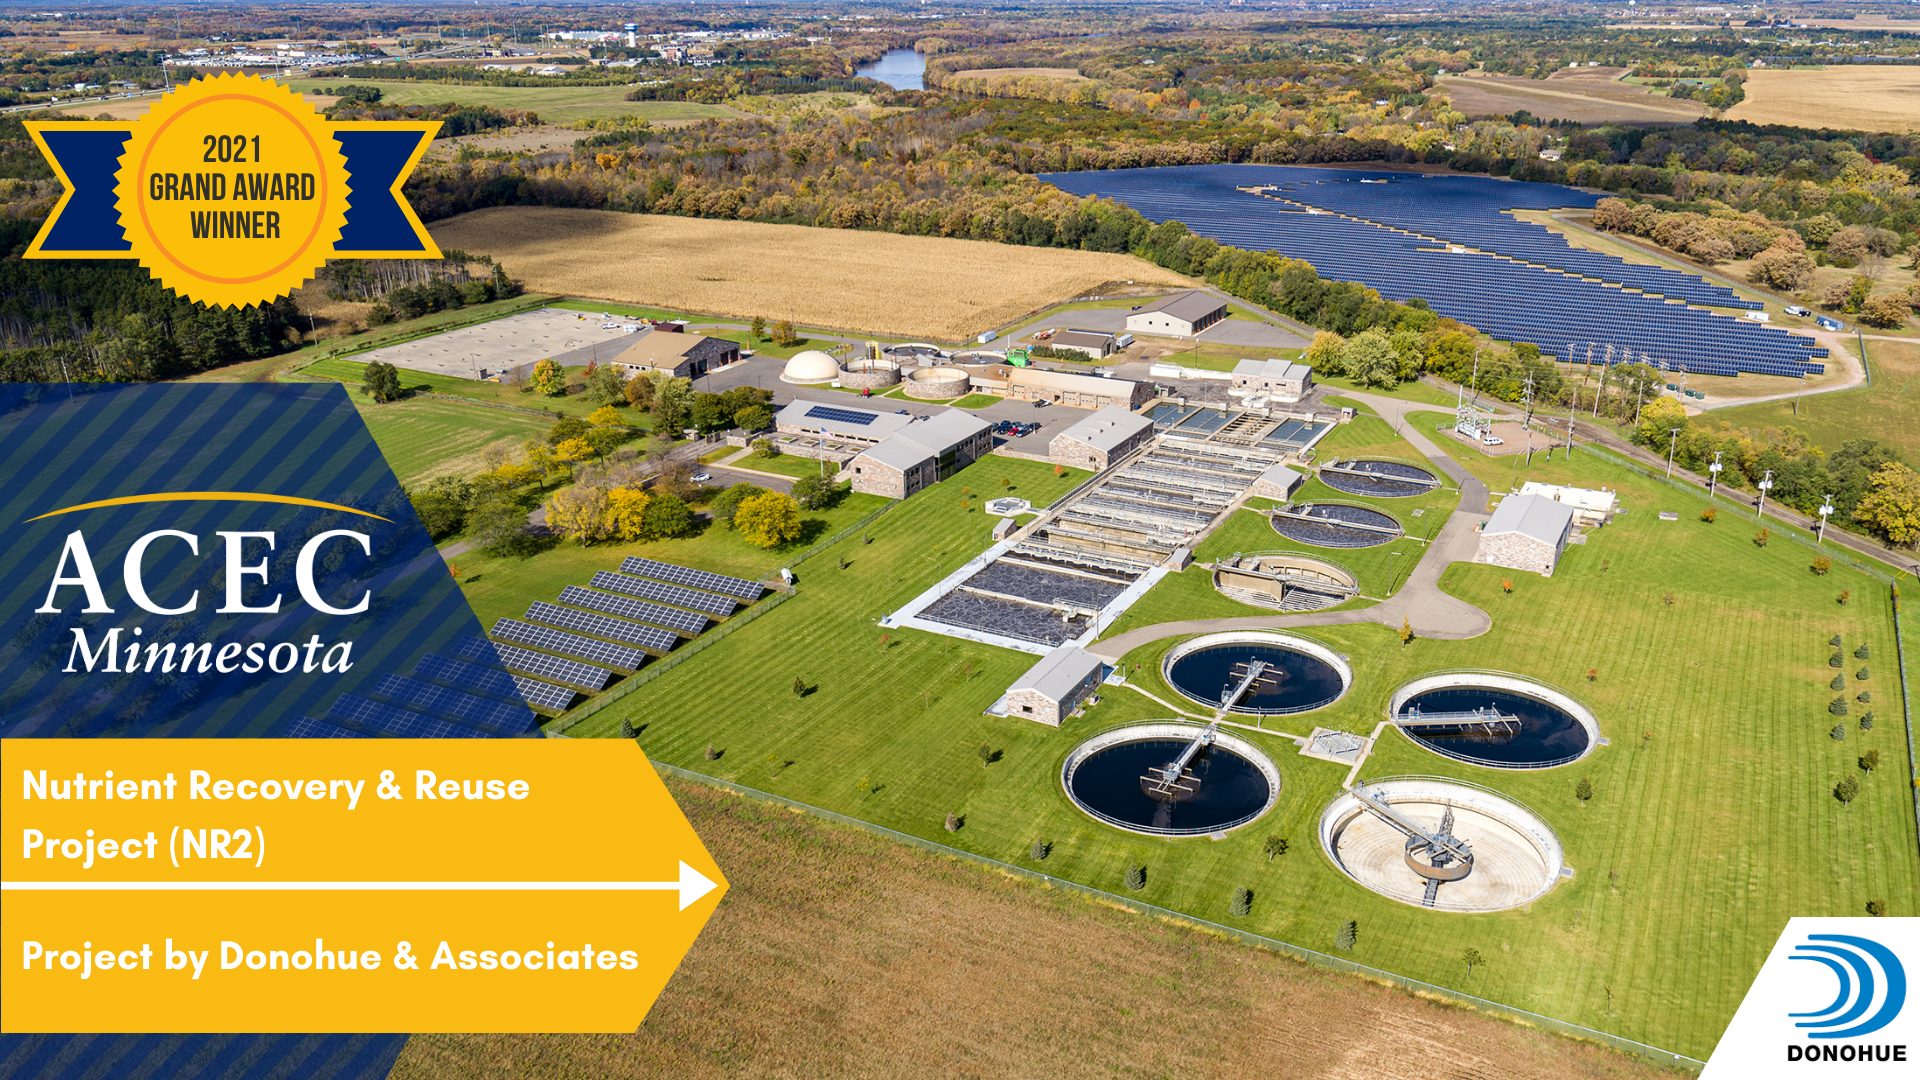 Nutrient Recovery &amp; Reuse Project (NR2), Donohue &amp; Associates (3)